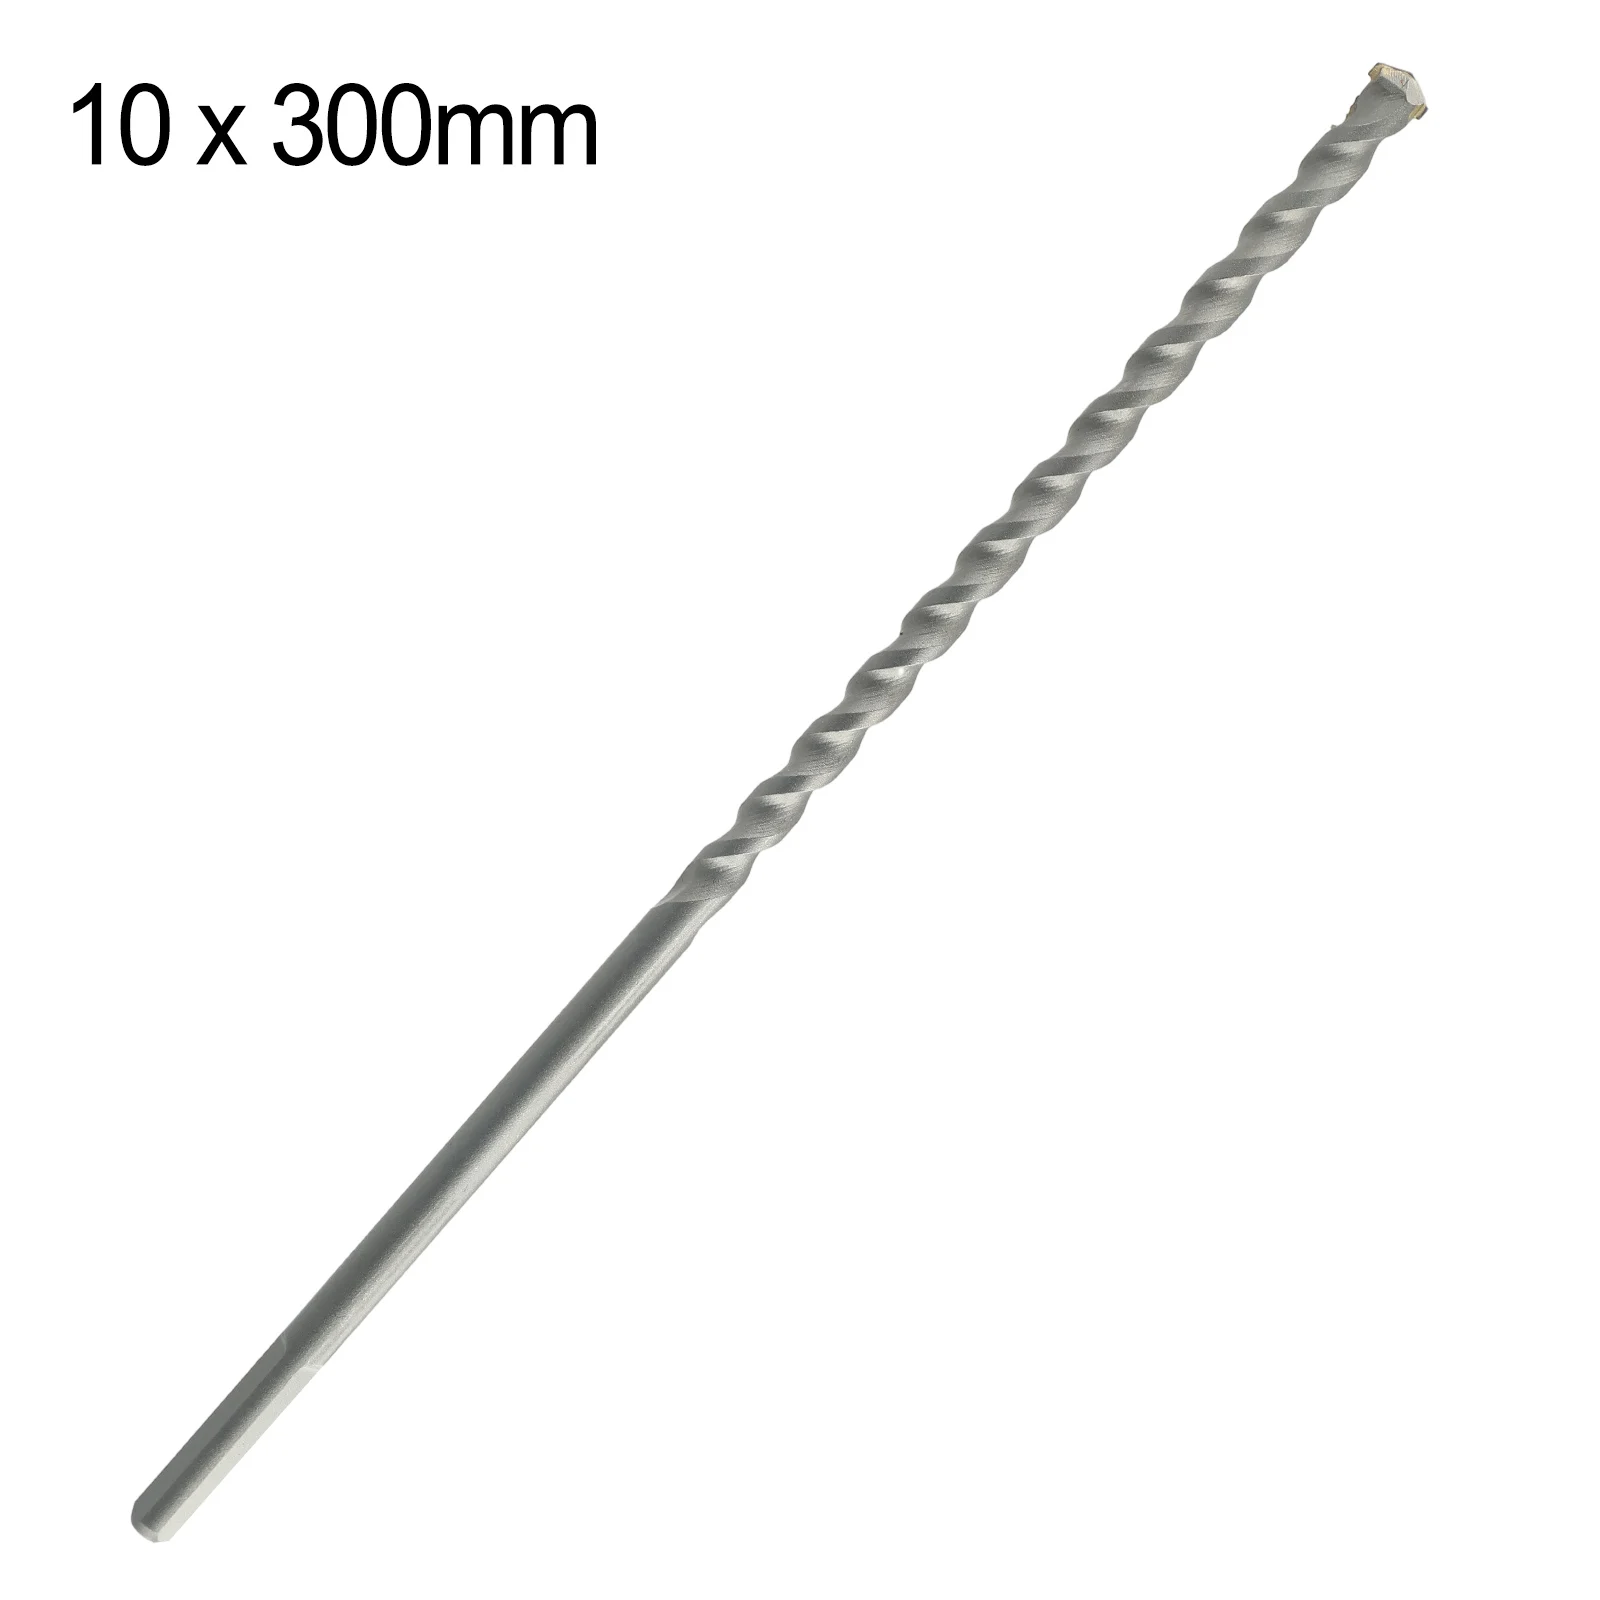 Parts Drill Bits 300-350mm 6-16mm Alloy Attachment Shank Triangle Components Drill Equipment Heavy Duty Impact